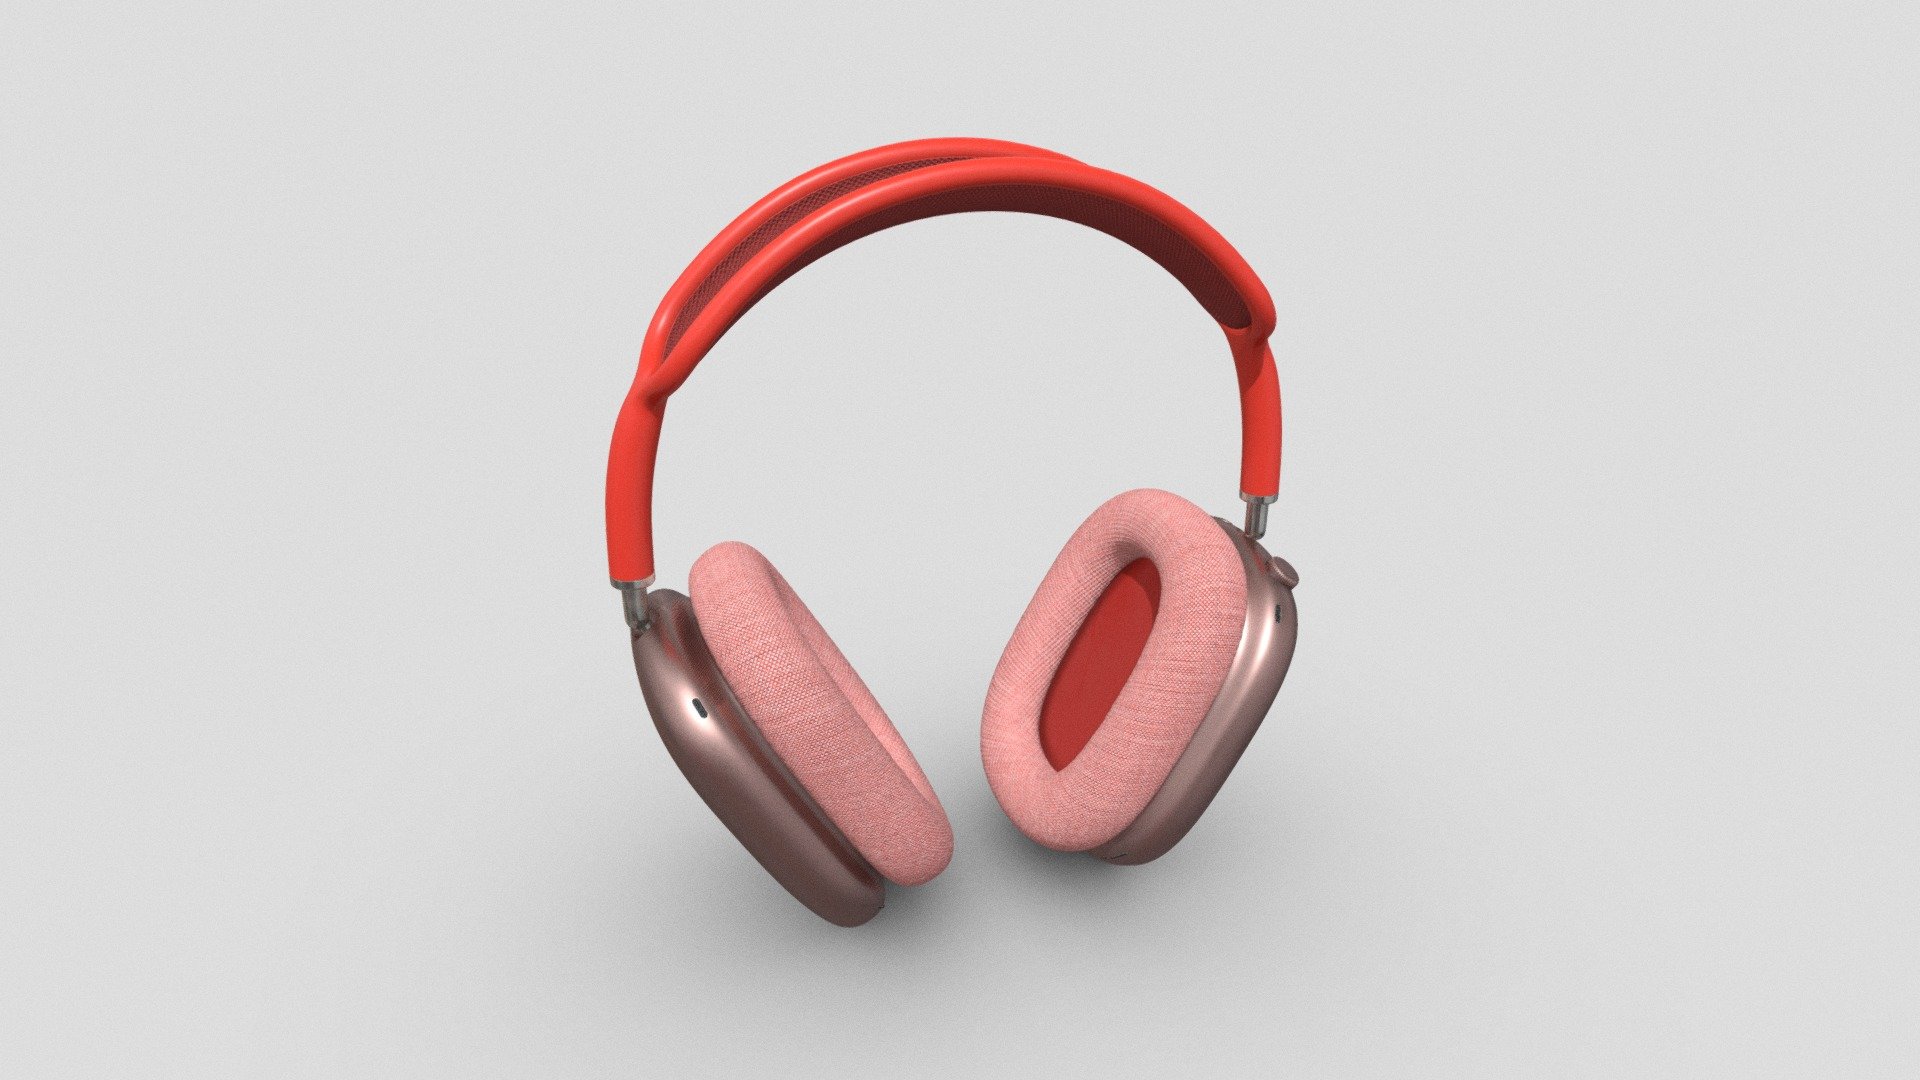 3d model of a AirPods Max Headphone.
Best use for adding detail on your Architectural Visualization or Interior Design.
This product is made in Blender and ready to render in Cycle. Unit setup is metres and the models are scaled to match real life objects.
The model comes with textures and materials and is positioned in the center of the coordinates system.
No additional plugin is needed to open the model.

Notes:

Geometry: Polygonal

Textures: Yes

Materials: Yes

Rigged: No

Animated: No

UV Mapped: Yes

Unwrapped UVs: Yes, non-overlapping

Bake all map

Hope you like it! Thank you! - AirPods Max Headphone - Buy Royalty Free 3D model by Toss90 3d model